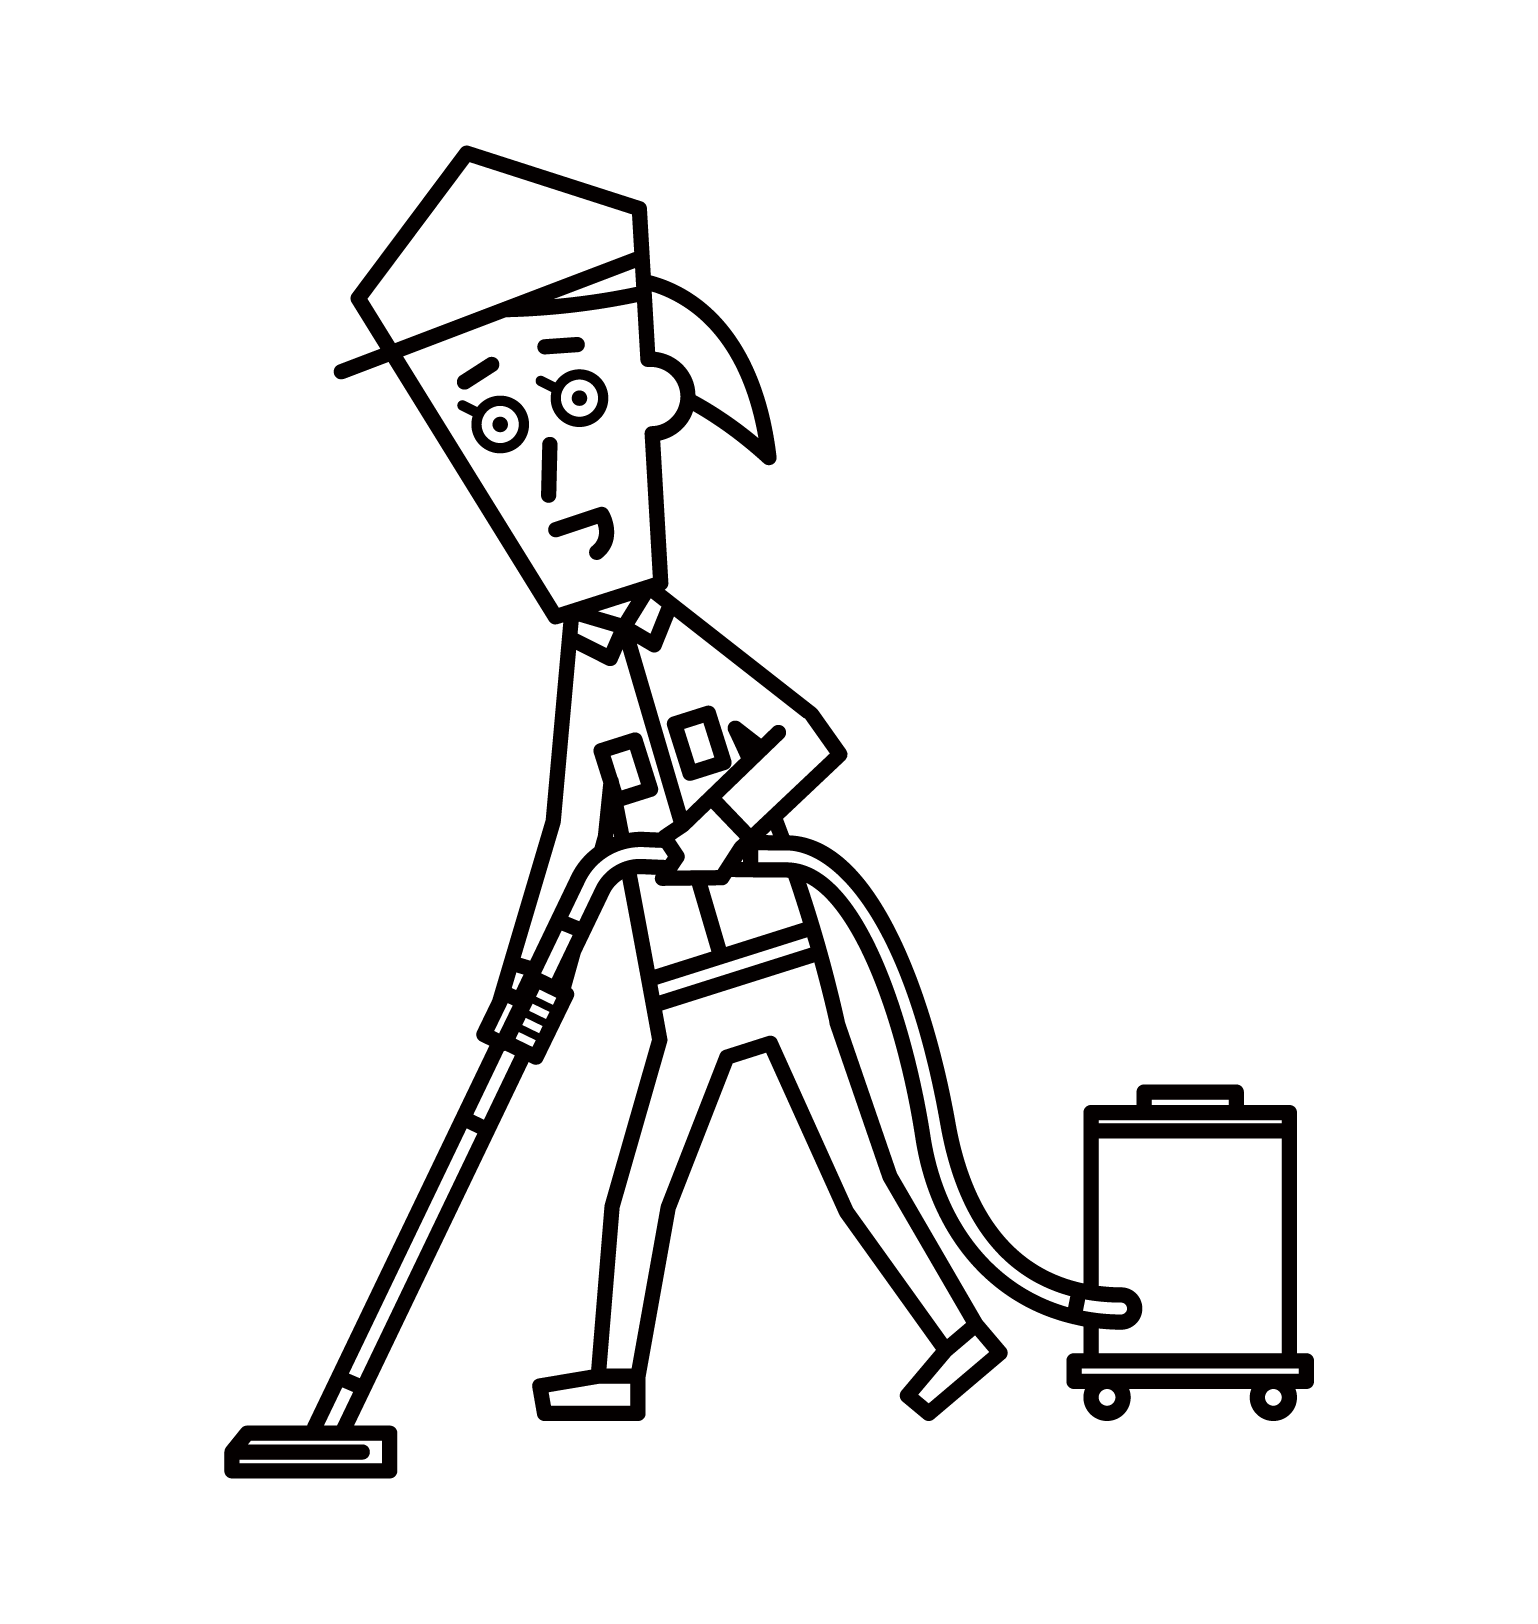 Illustration of a cleaning worker (female)